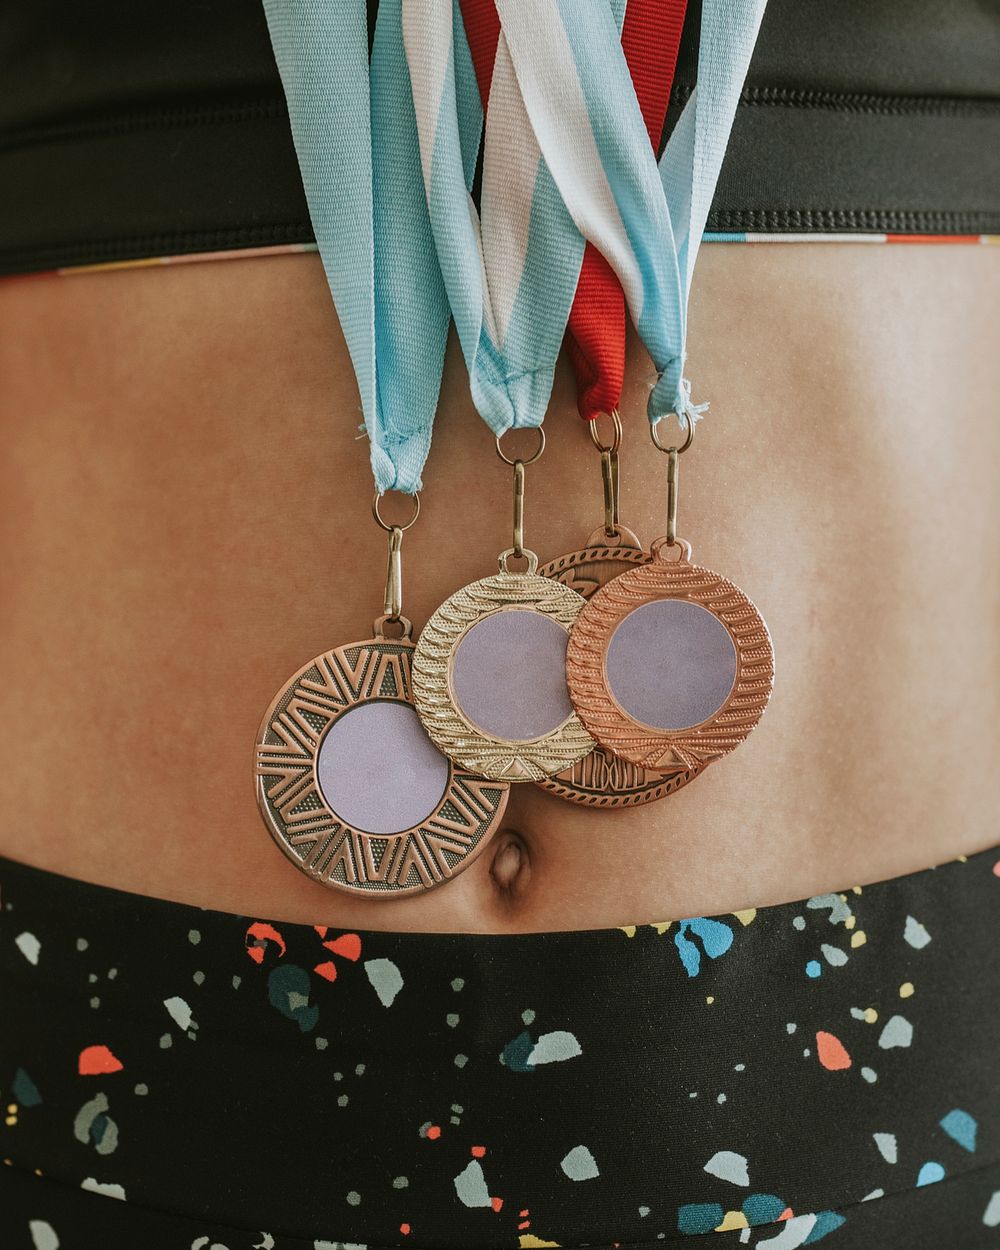 Young gymnast with many medals